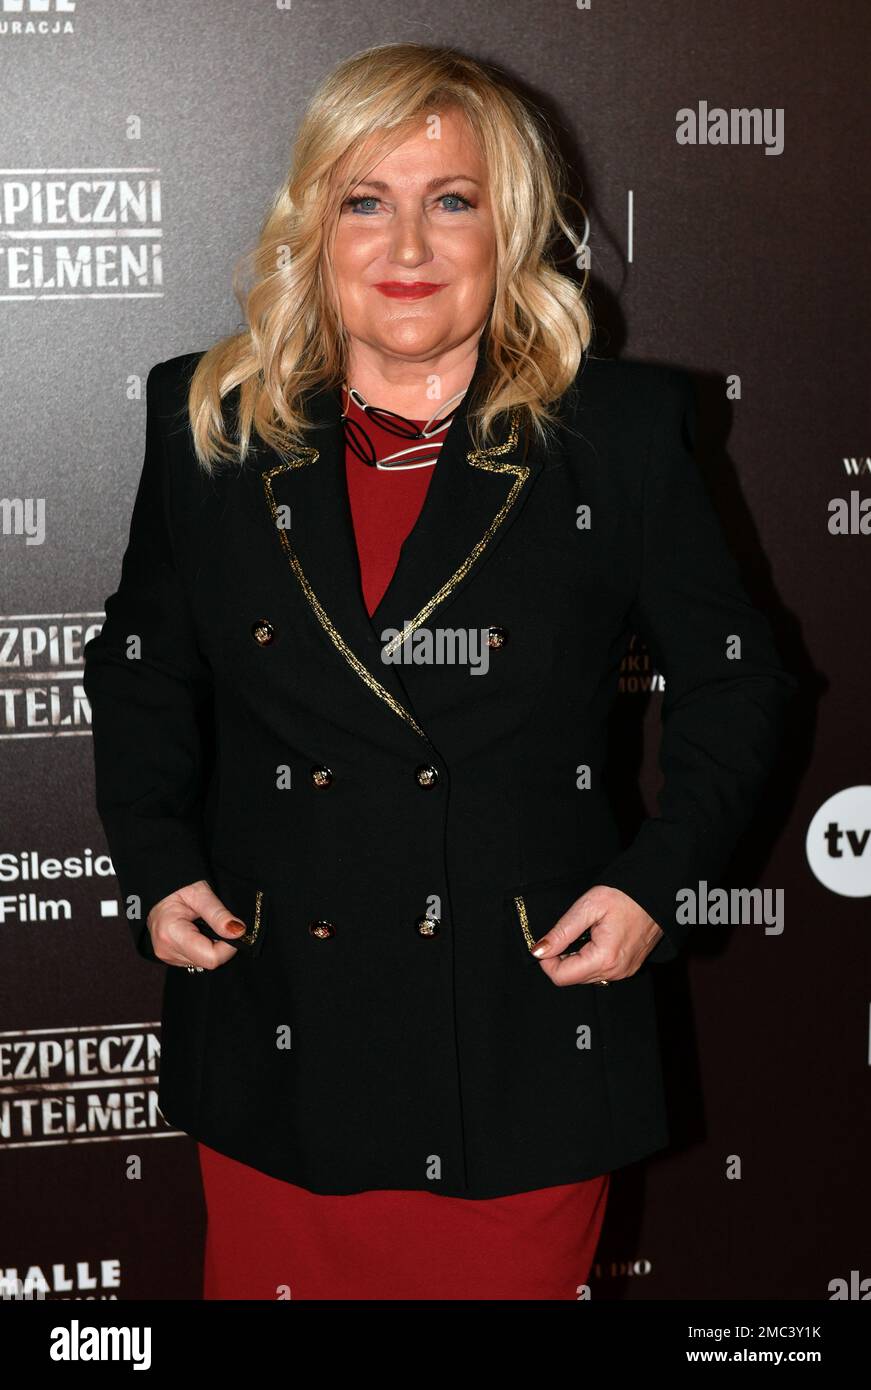 Singer Marlena Drozdowska attends the ceremonial premiere of the film 'Dangerous Gentlemen' directed by Marcin Kawalski took place at Cinema City in Warsaw. Stock Photo